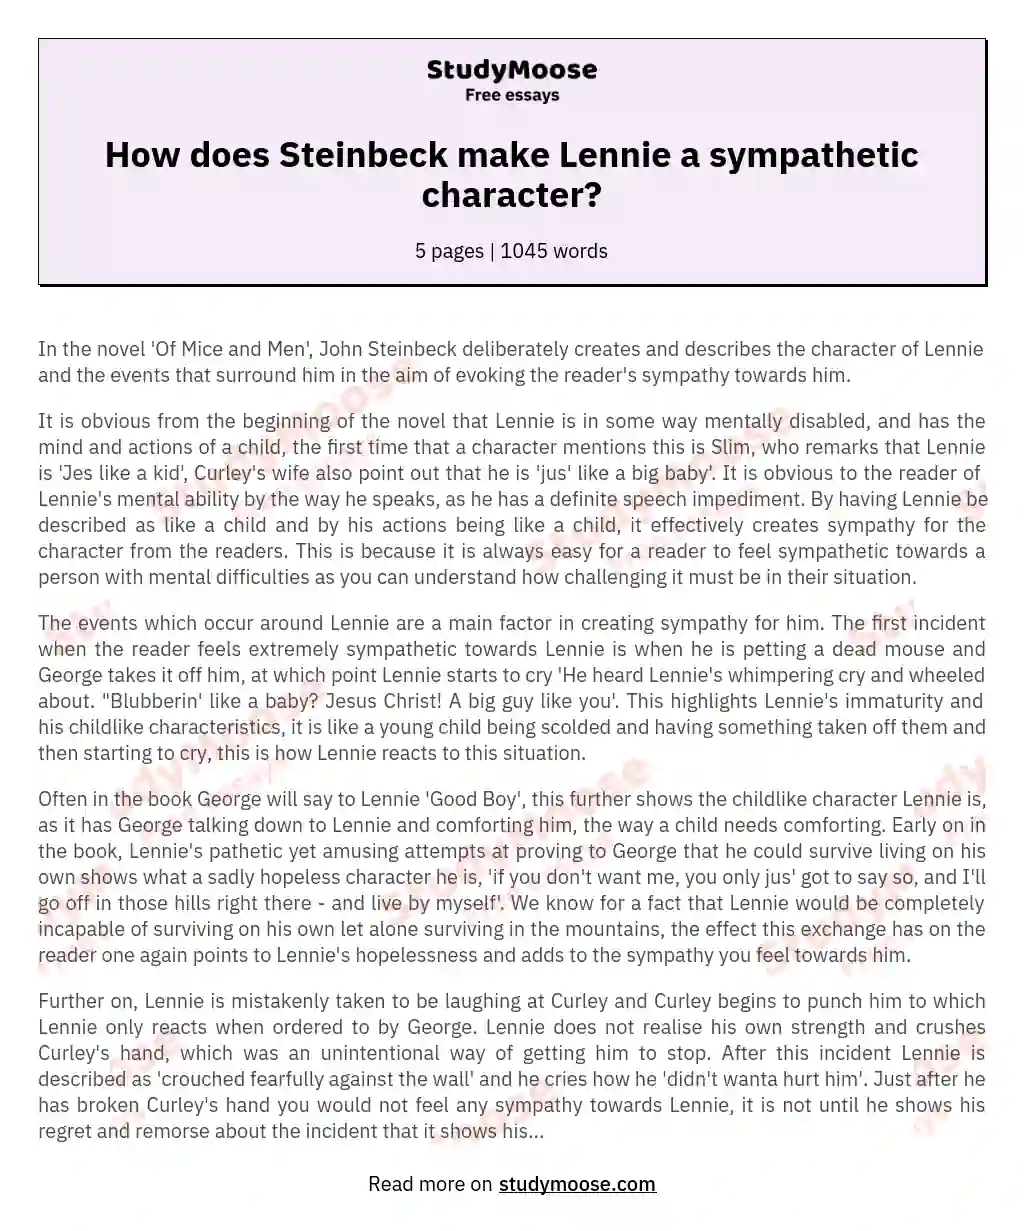 How does Steinbeck make Lennie a sympathetic character?